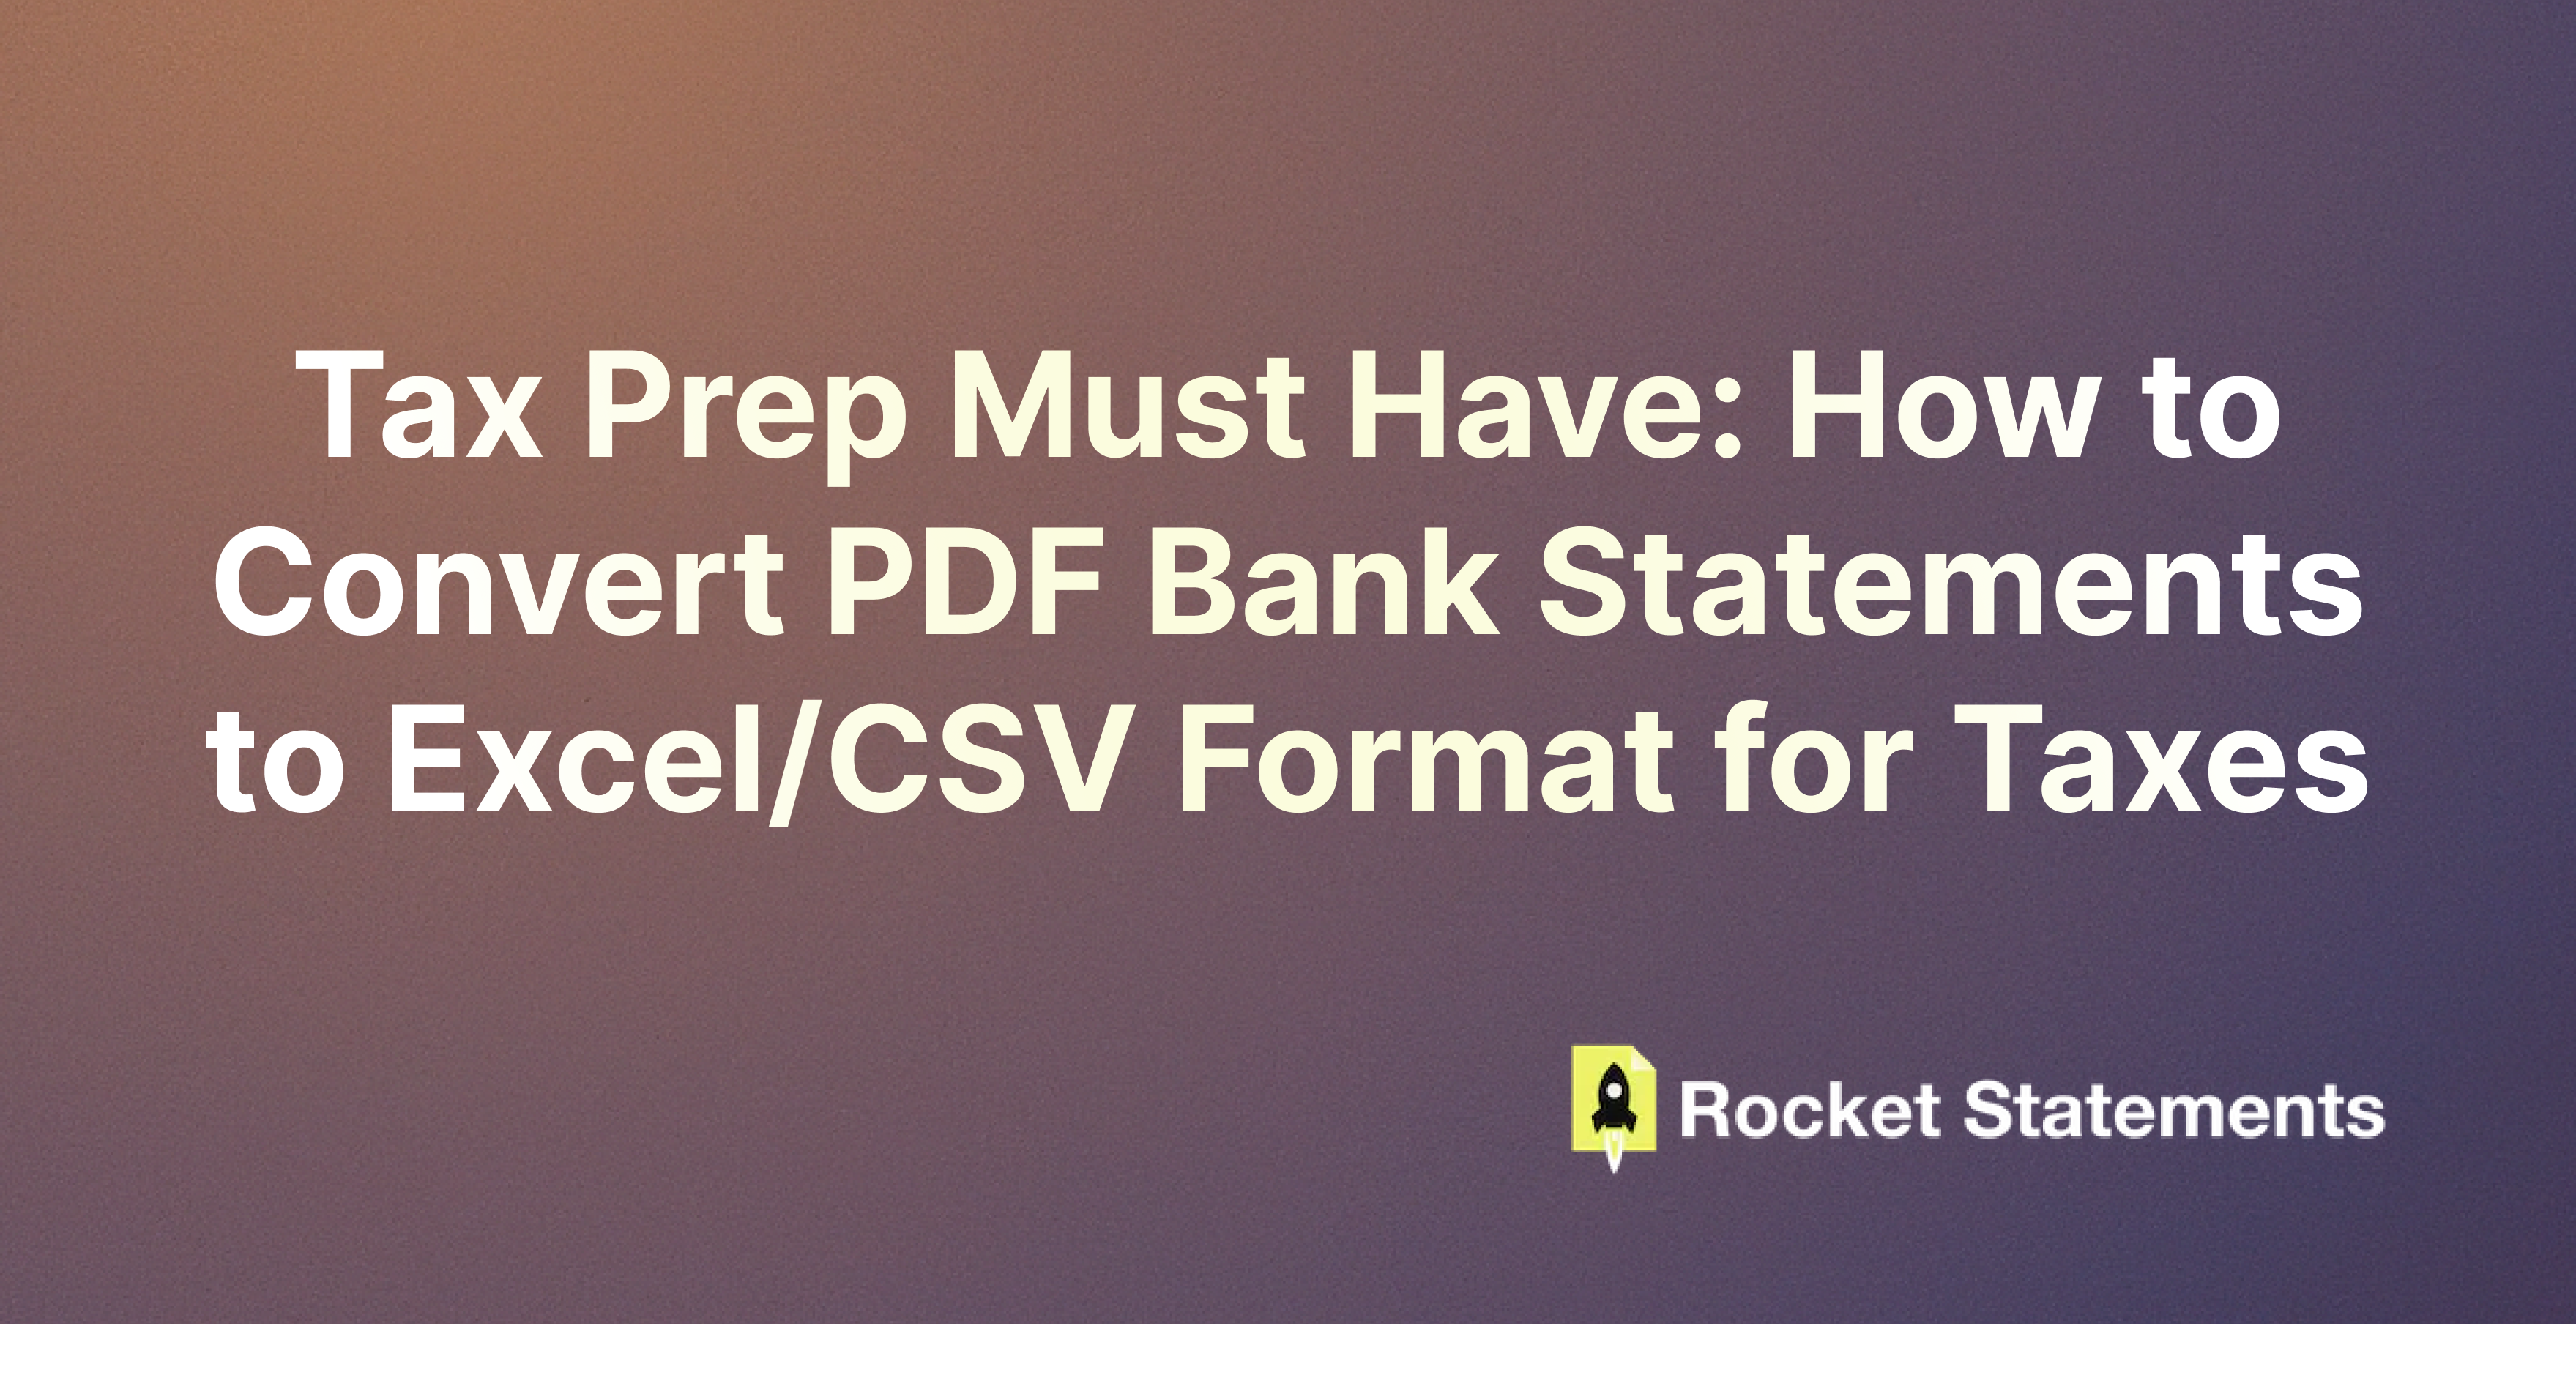 Tax Prep Must Have: How to Convert PDF Bank Statements to Excel/CSV Format for Taxes